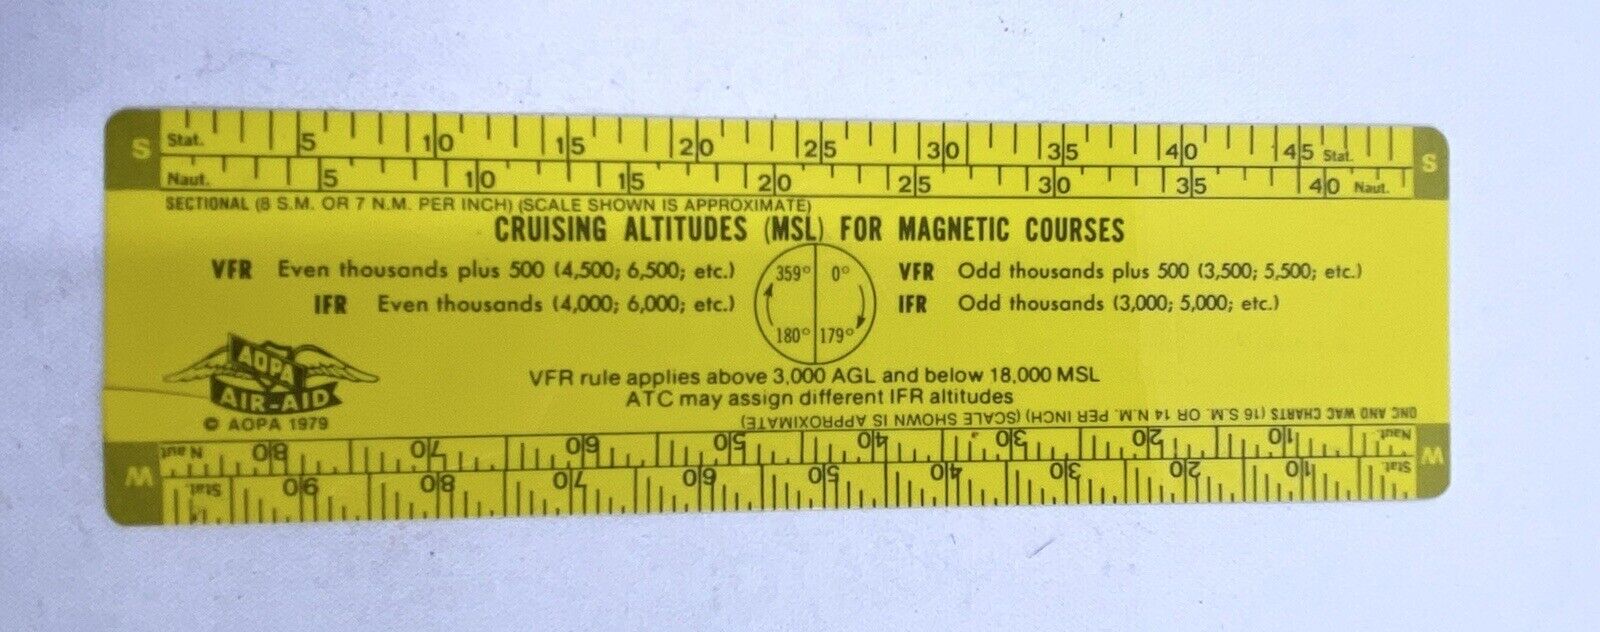 Vintage 1979 Aopa Air Aid Cruising Altitudes (MSL) For Magnetic Courses